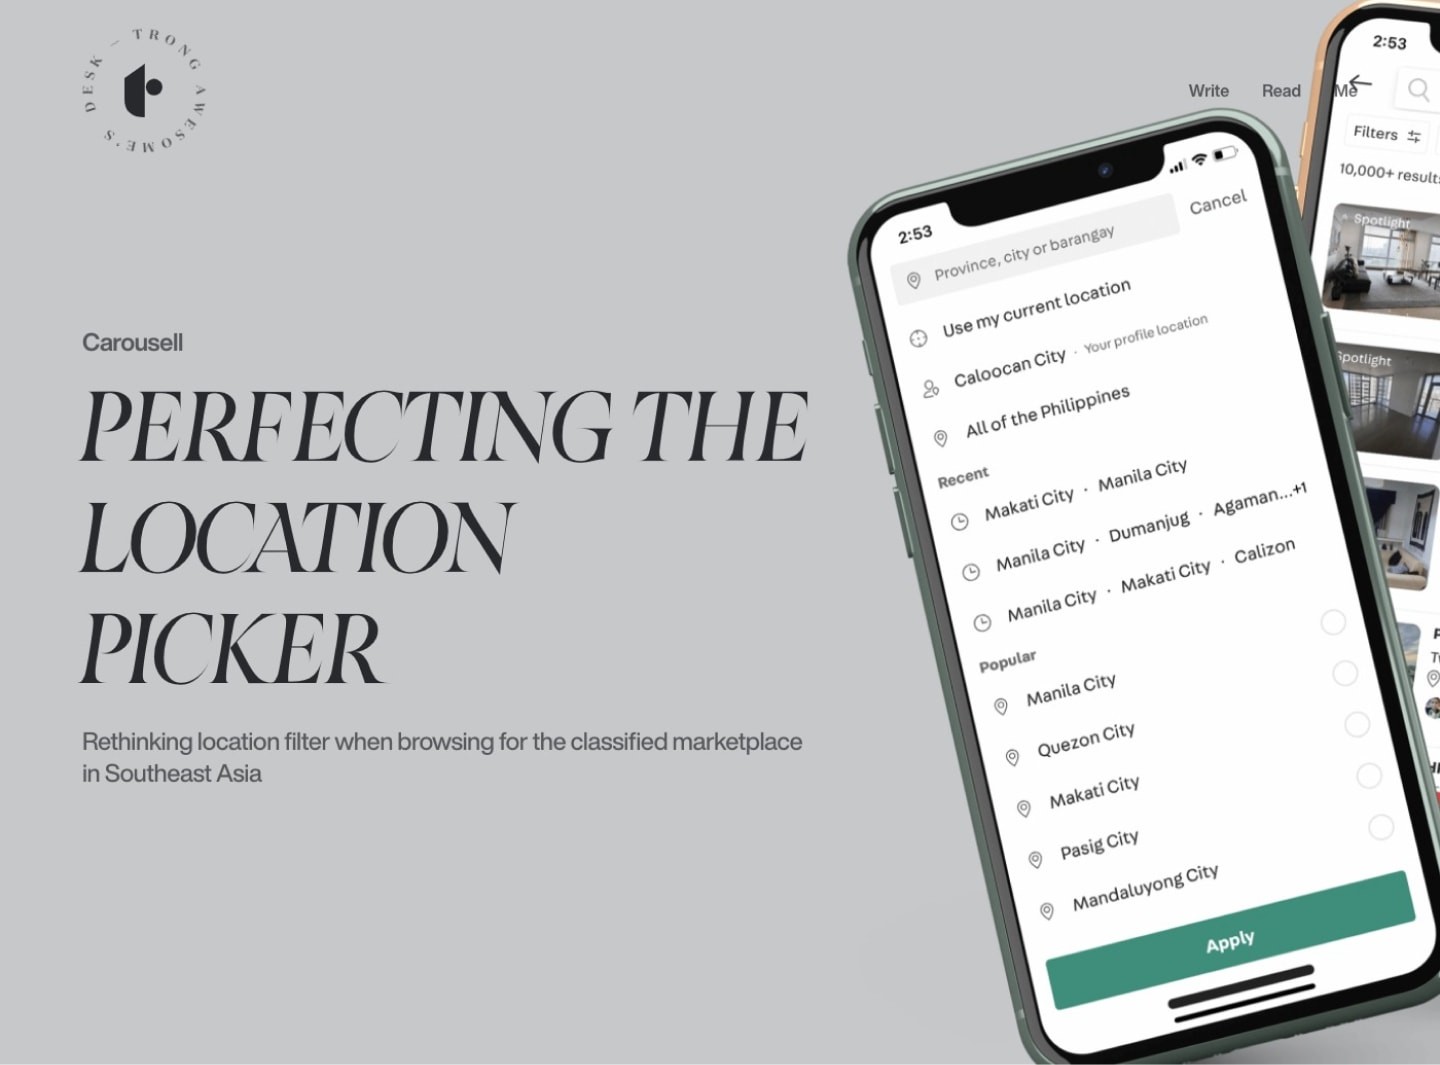 Perfecting the location picker d full